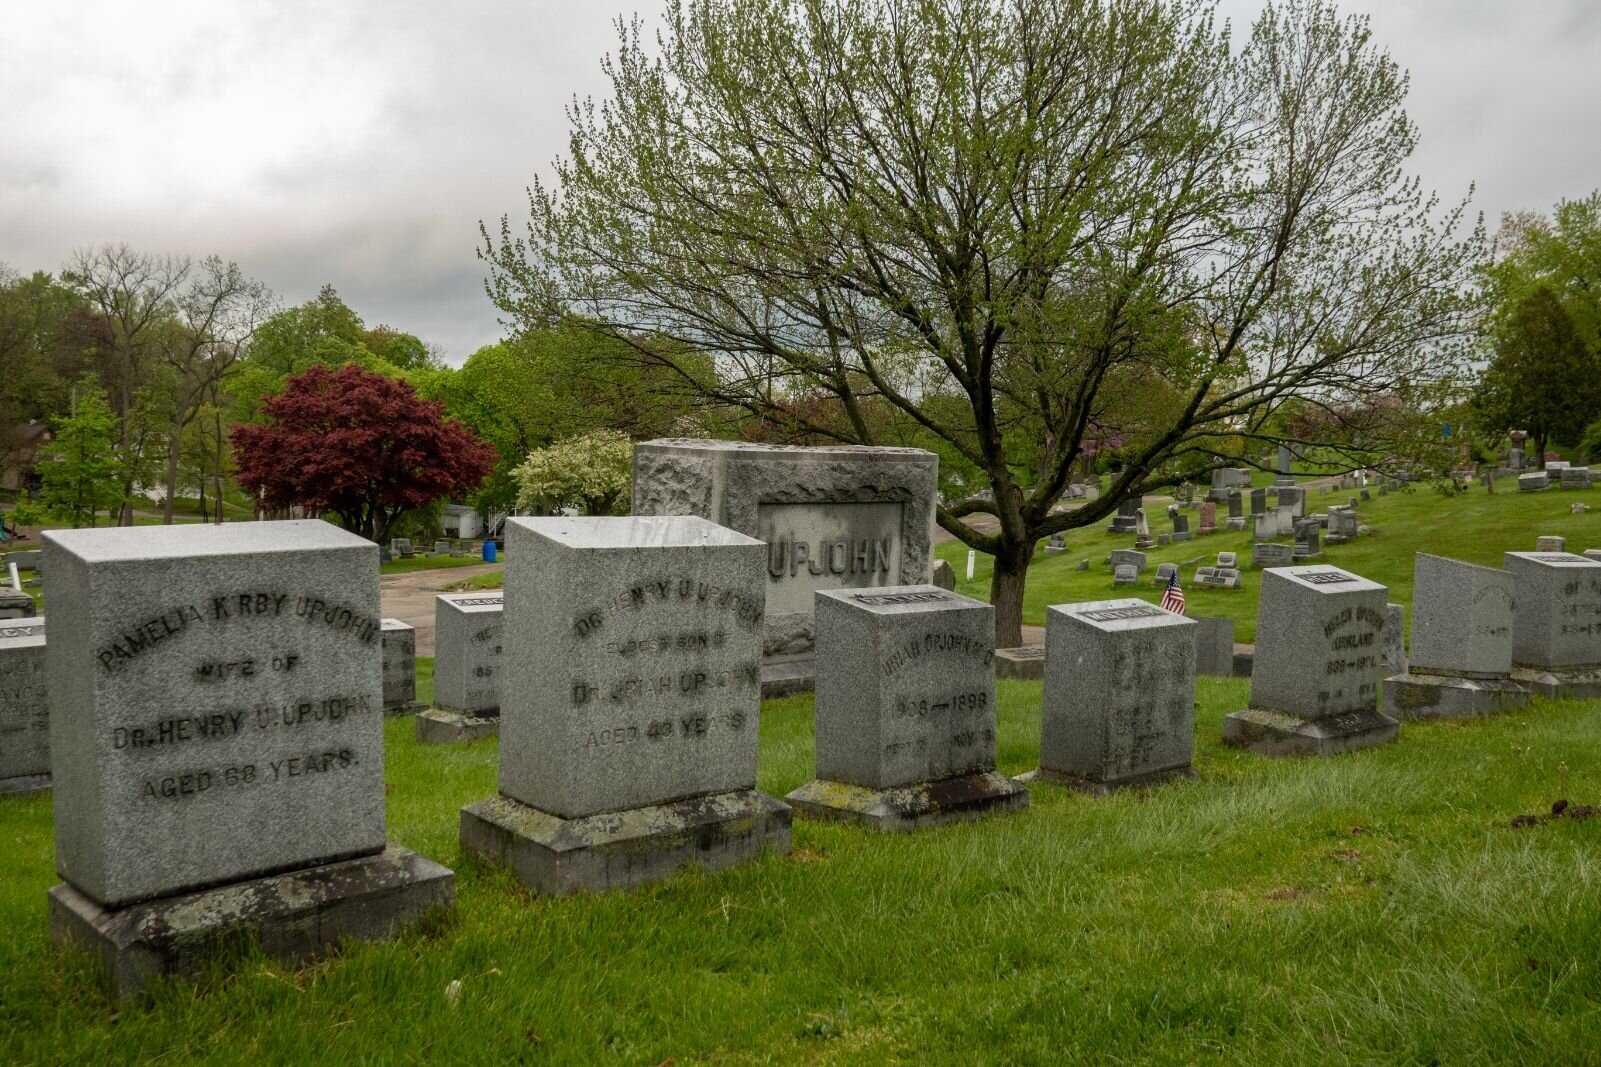 Family burial plots often included the headstones for members of related families adjacent to it. Shown here is one of two burial plots at Mountain Home Cemetery owned by the Upjohn family.